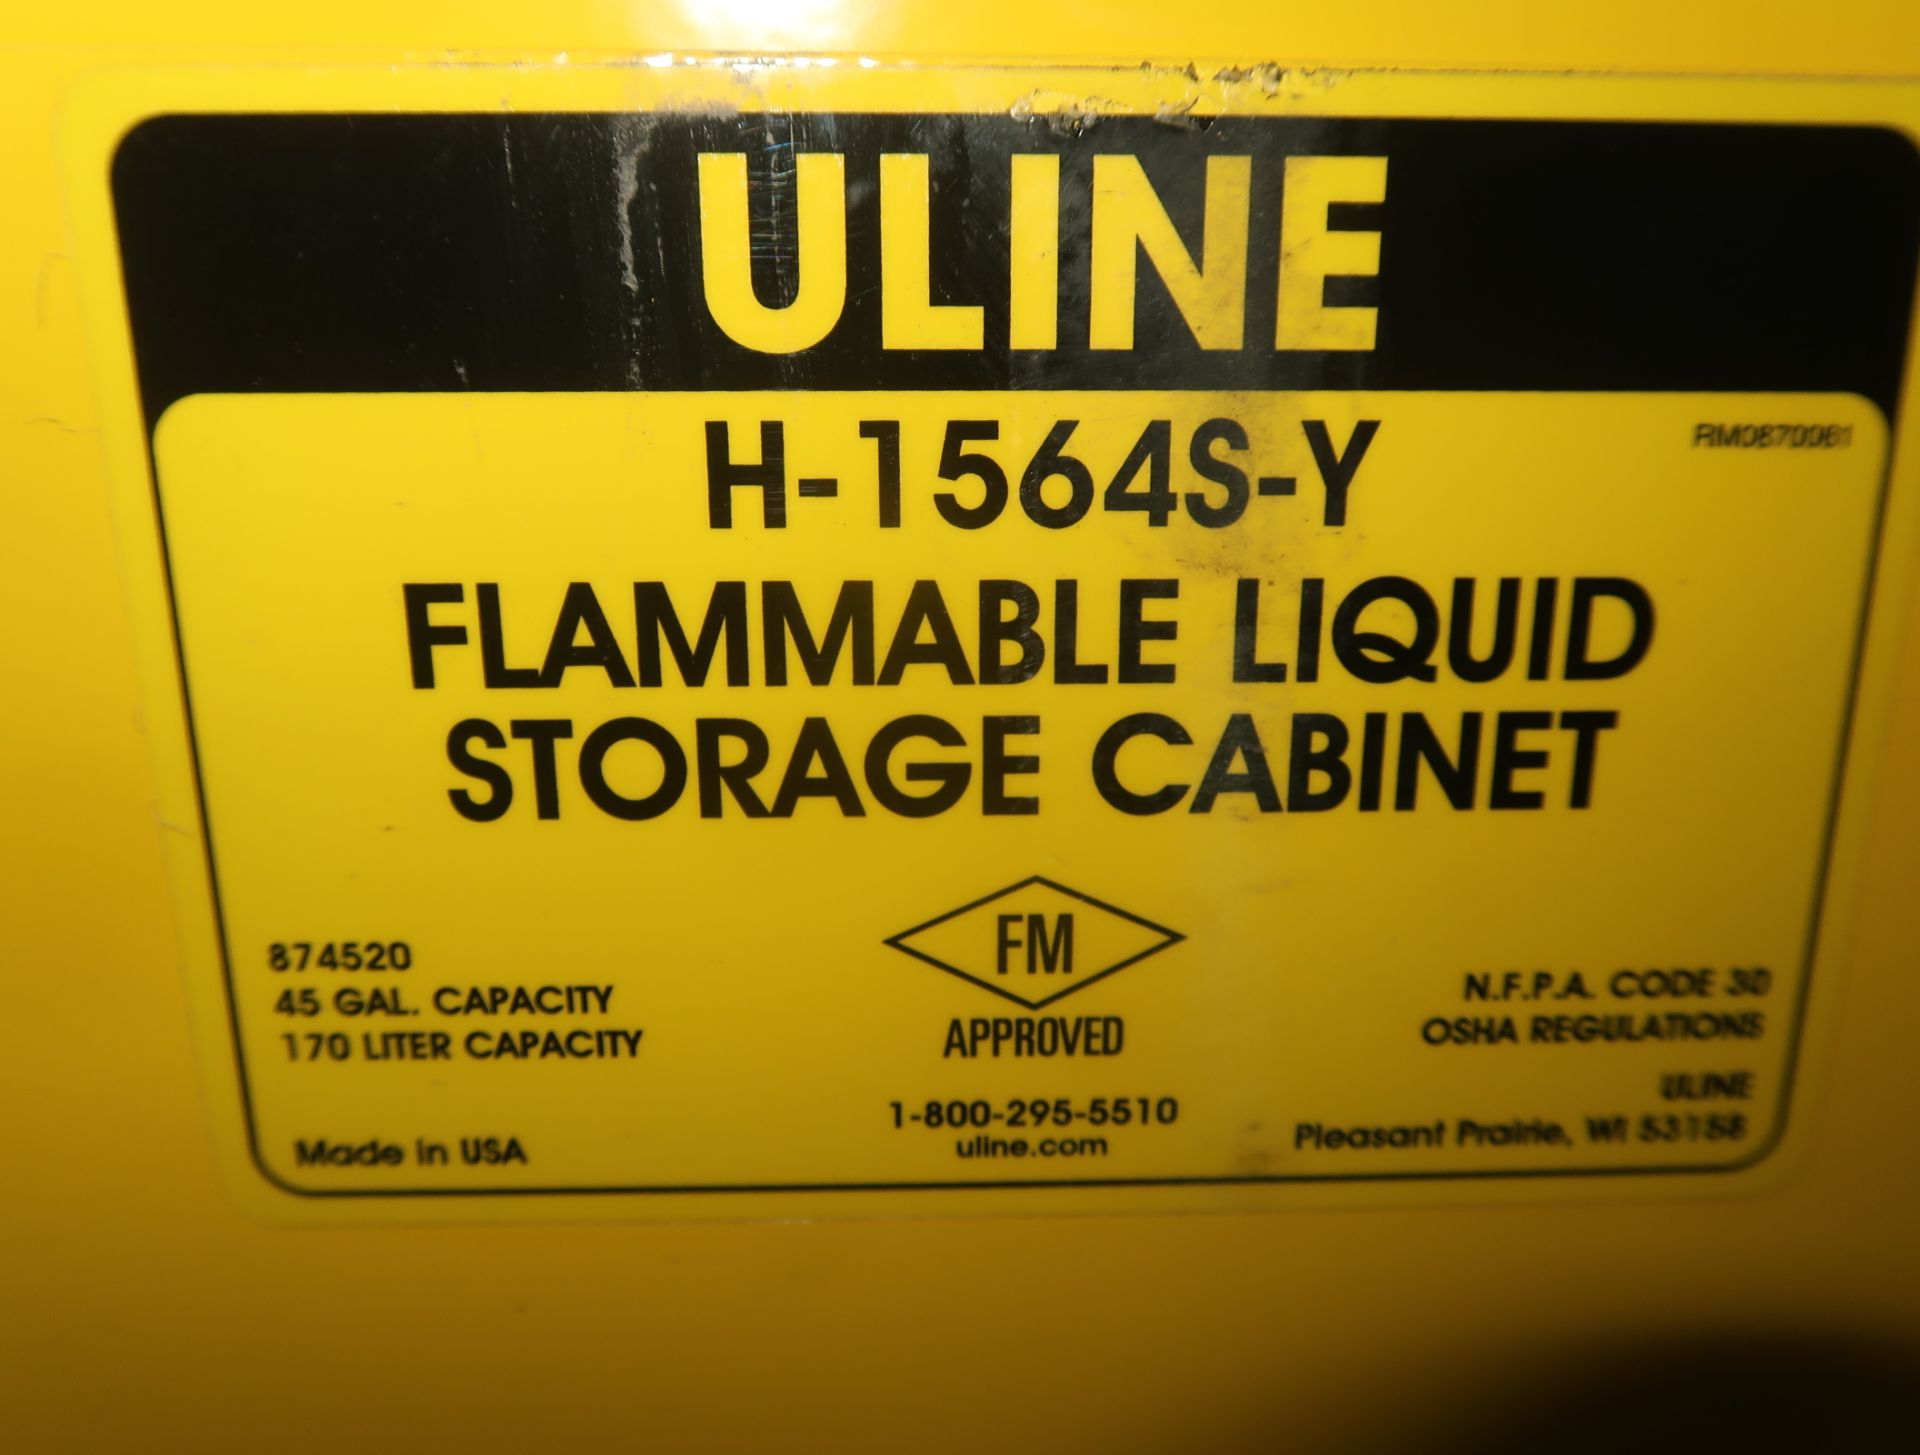 ULINE 45 GAL FLAMMABLE STORGE CABINET H-1564S-Y - Image 2 of 2